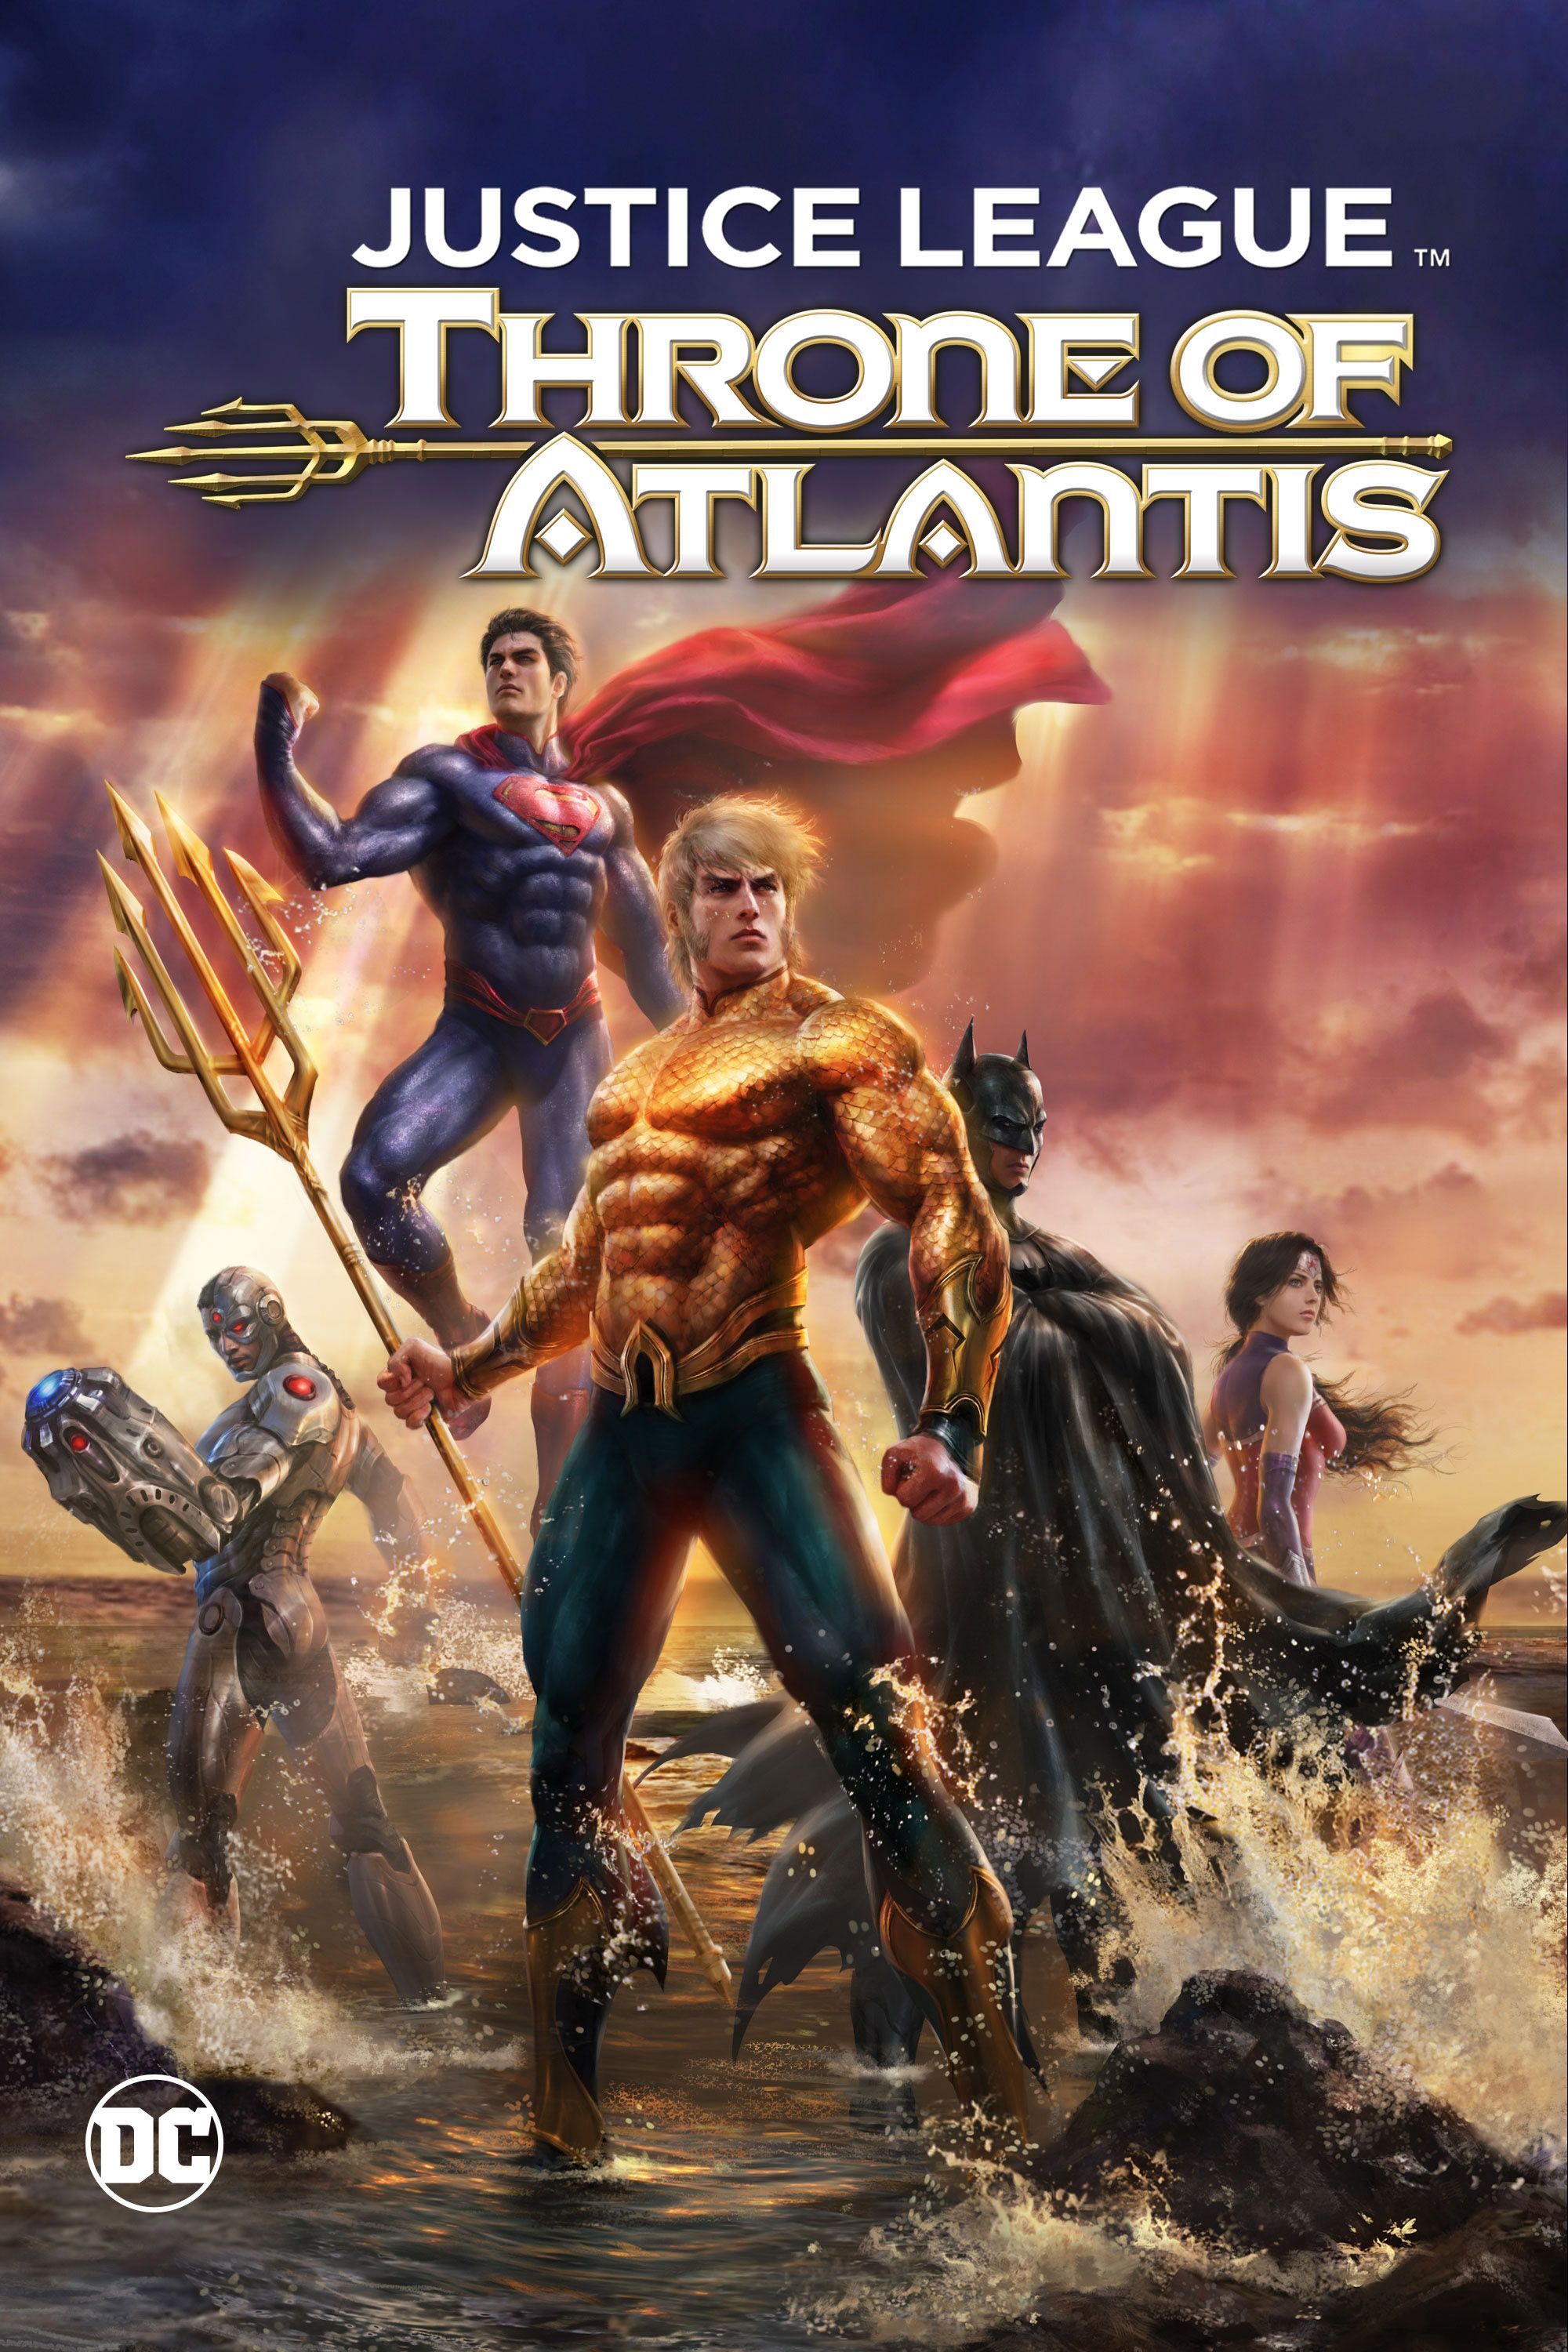 Justice League: Throne of Atlantis best dc animated movies